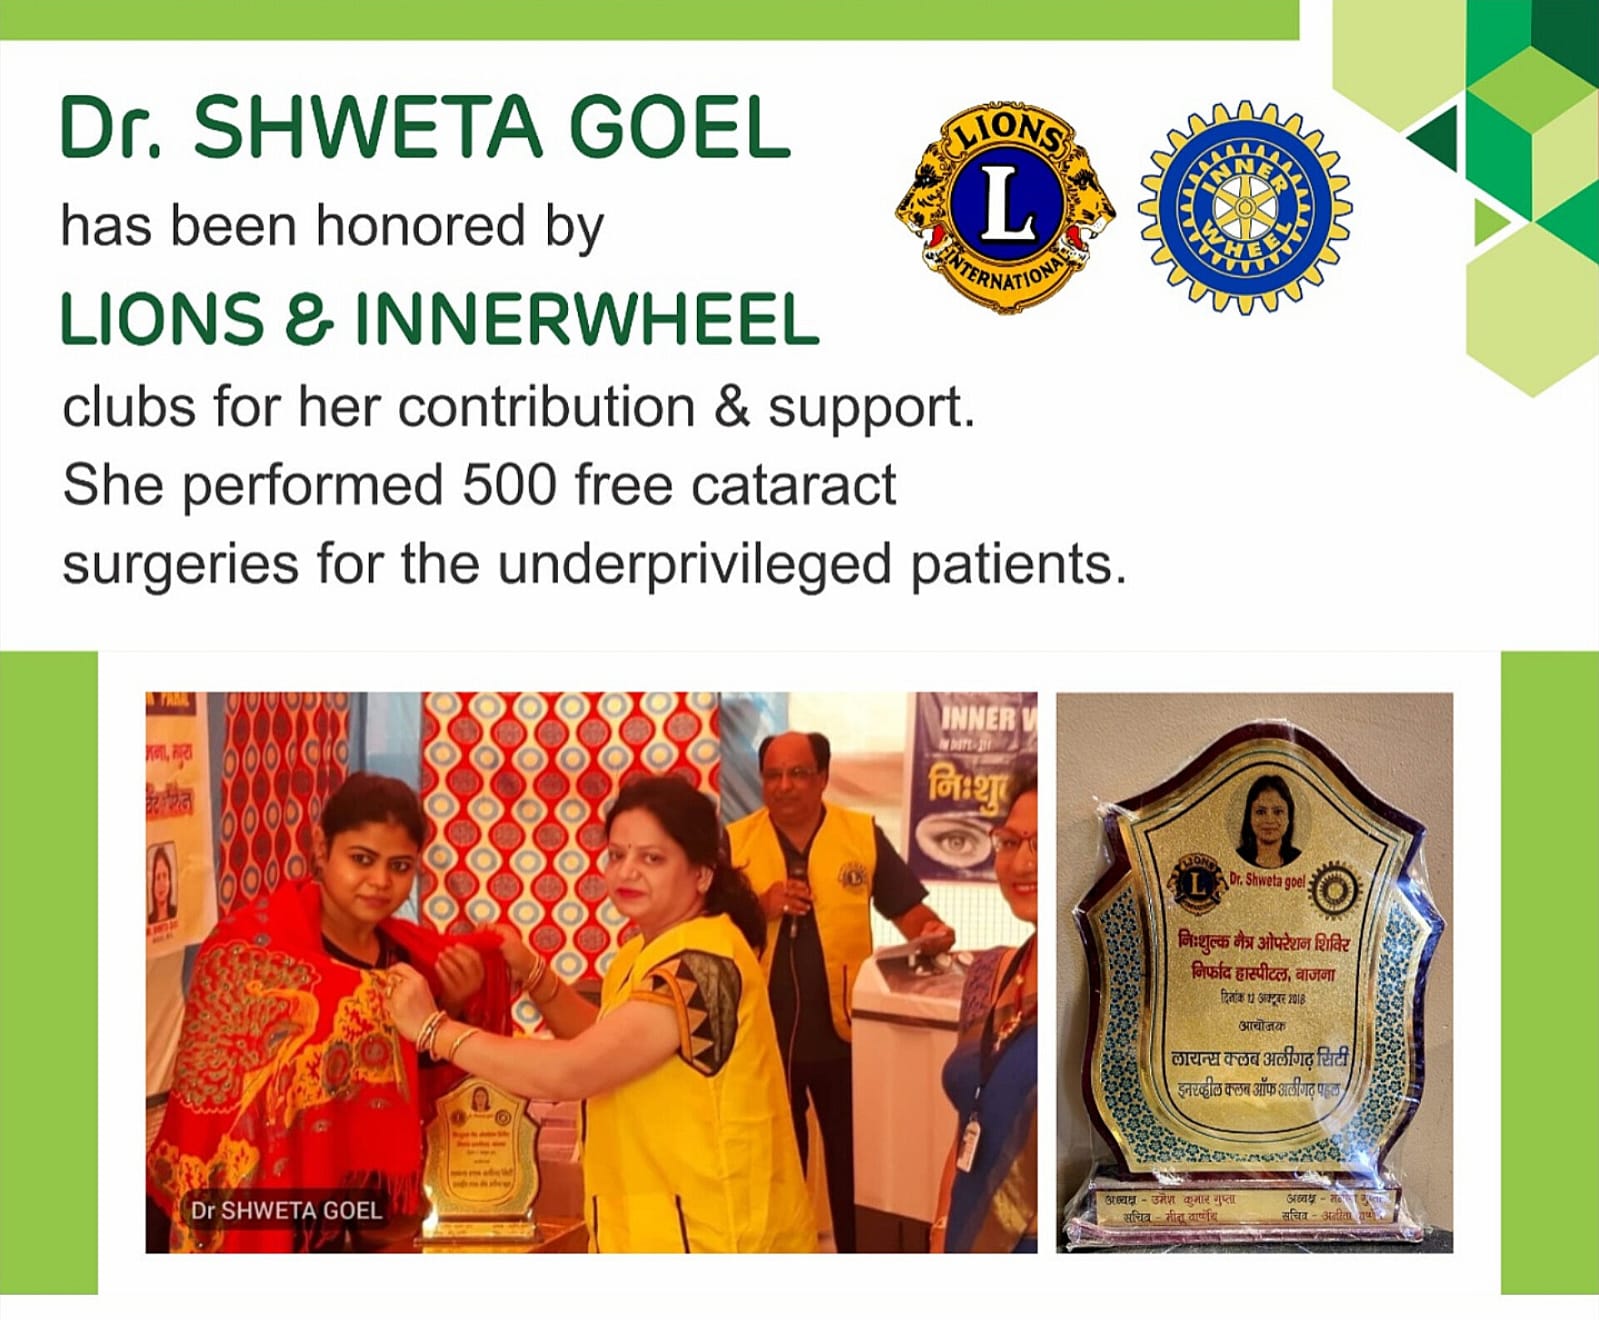 " AWARDED BY LIONS AND INNERWHEEL CLUB FOR IMENSE CONTRIBUTION TO SOCIETY BY PERFORMING FREE CATARACT SURGERIES"